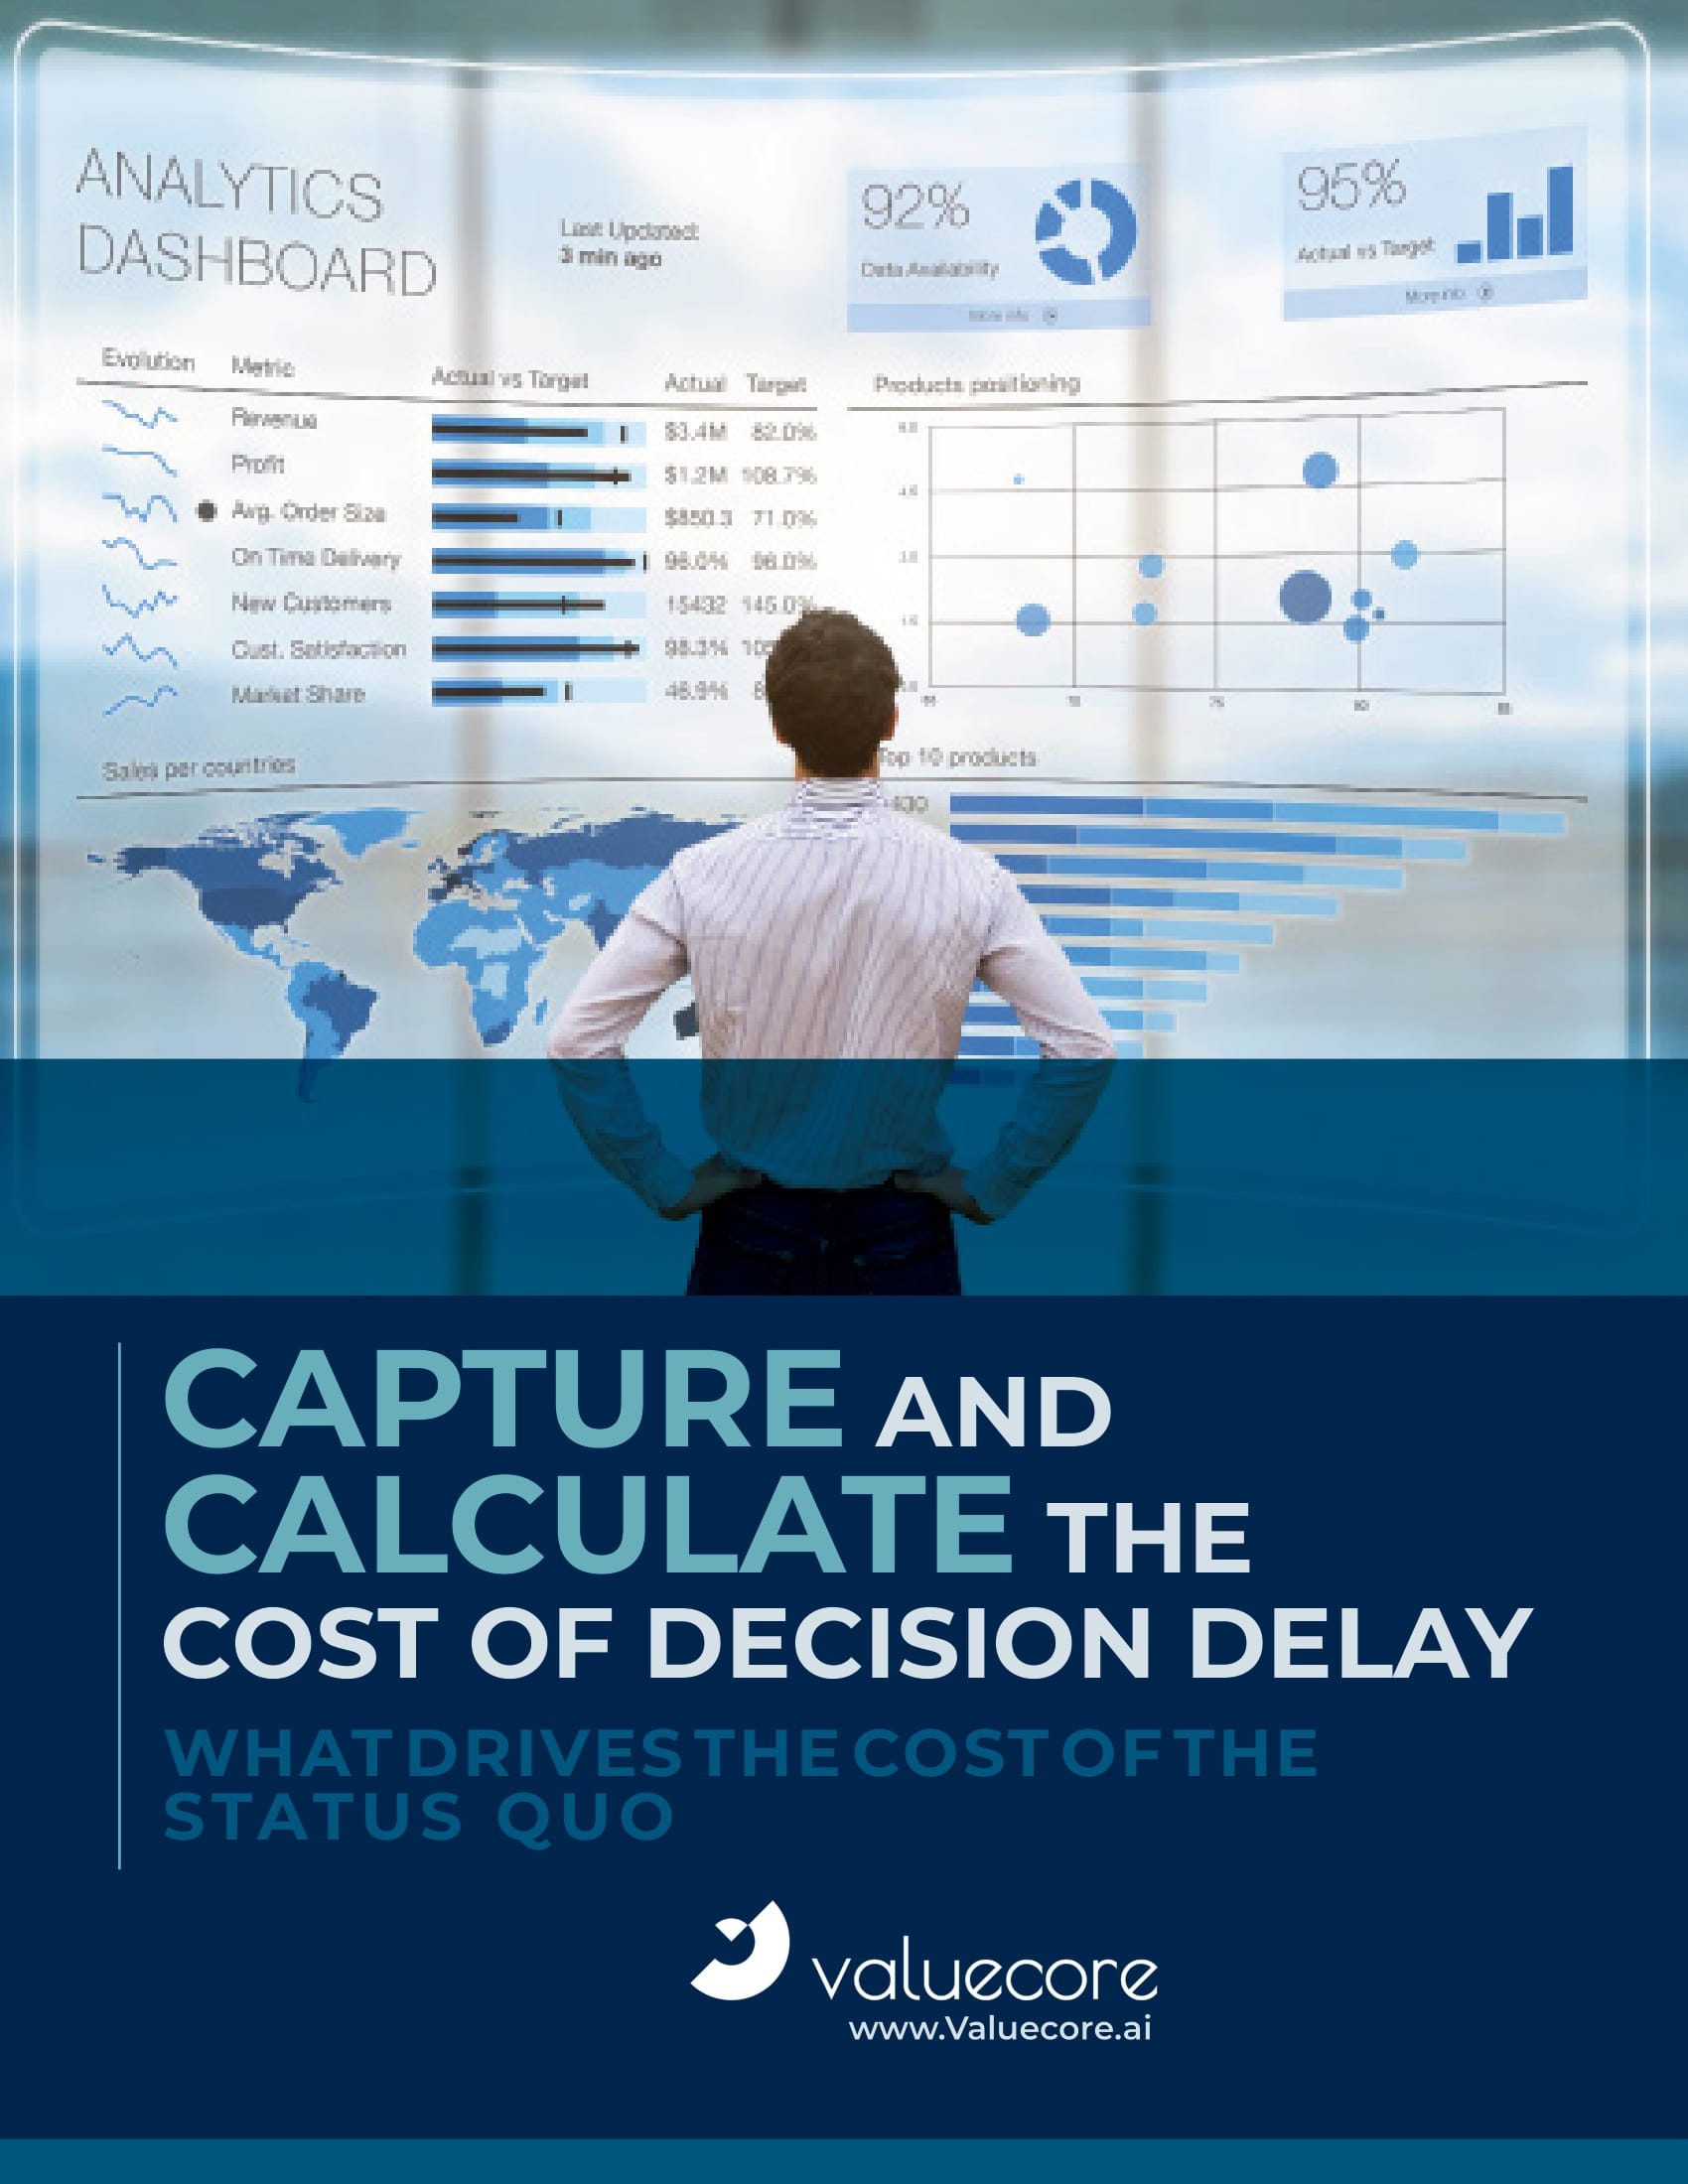 Image for <b>eBook: Capture and Calculate the Cost of Decision Delay</b>